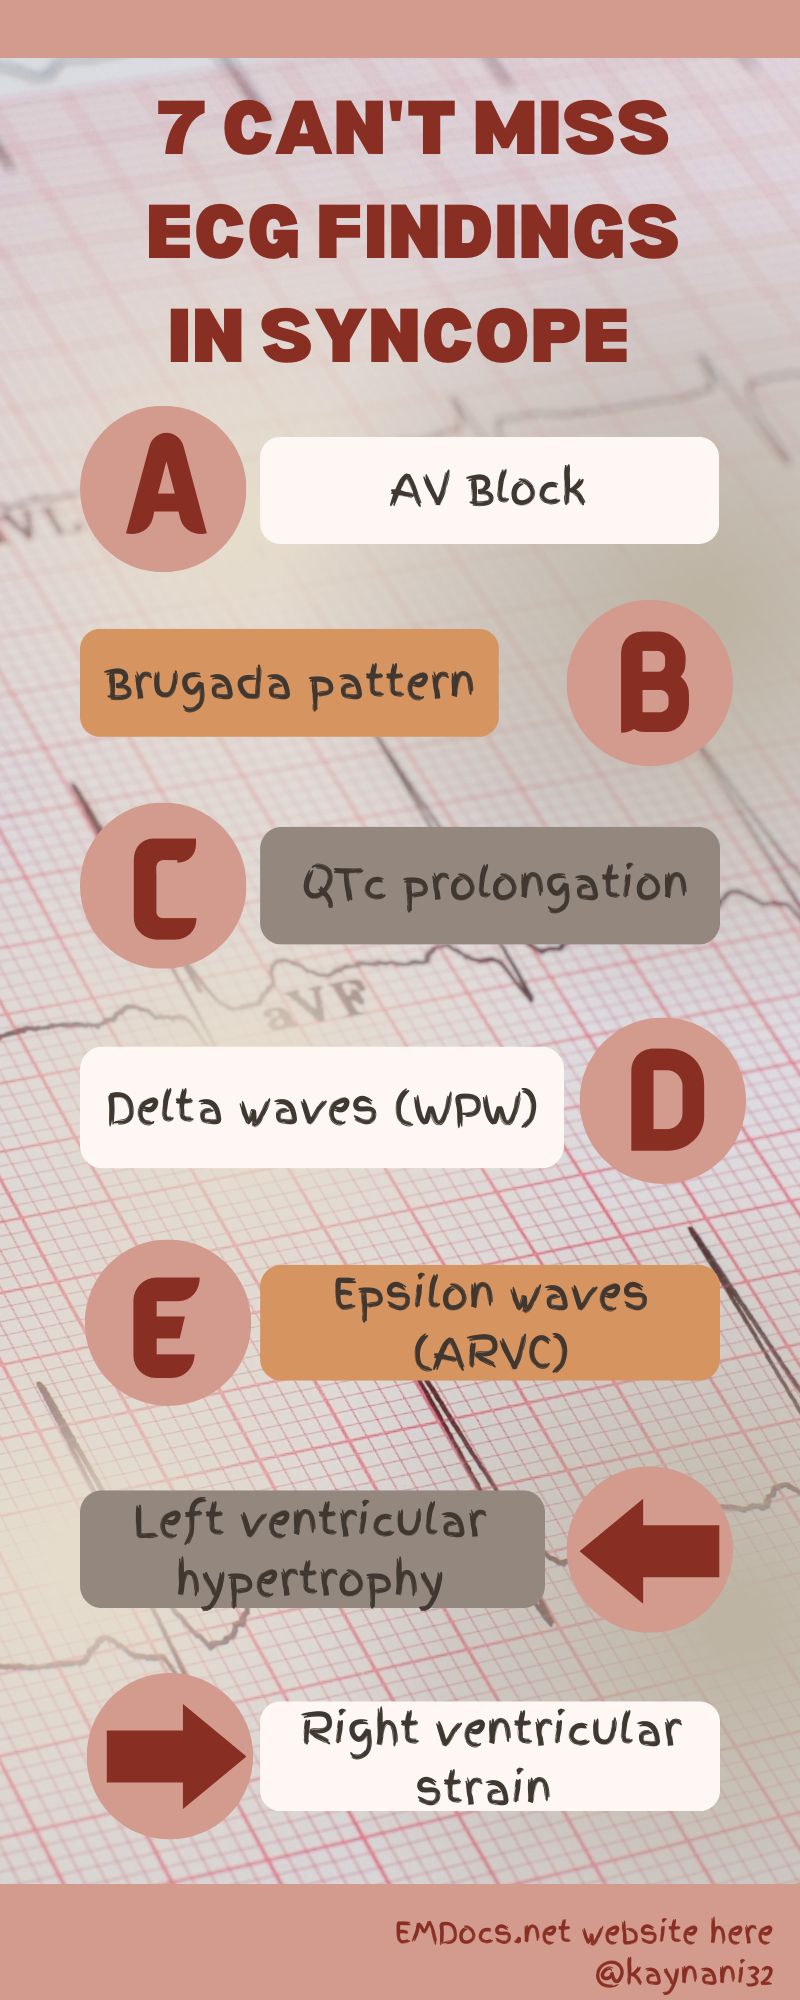 ECG Pointers: 7 Can’t-Miss ECG Patterns of High-Risk Syncope – the “ABCDE Left Right” Mnemonic